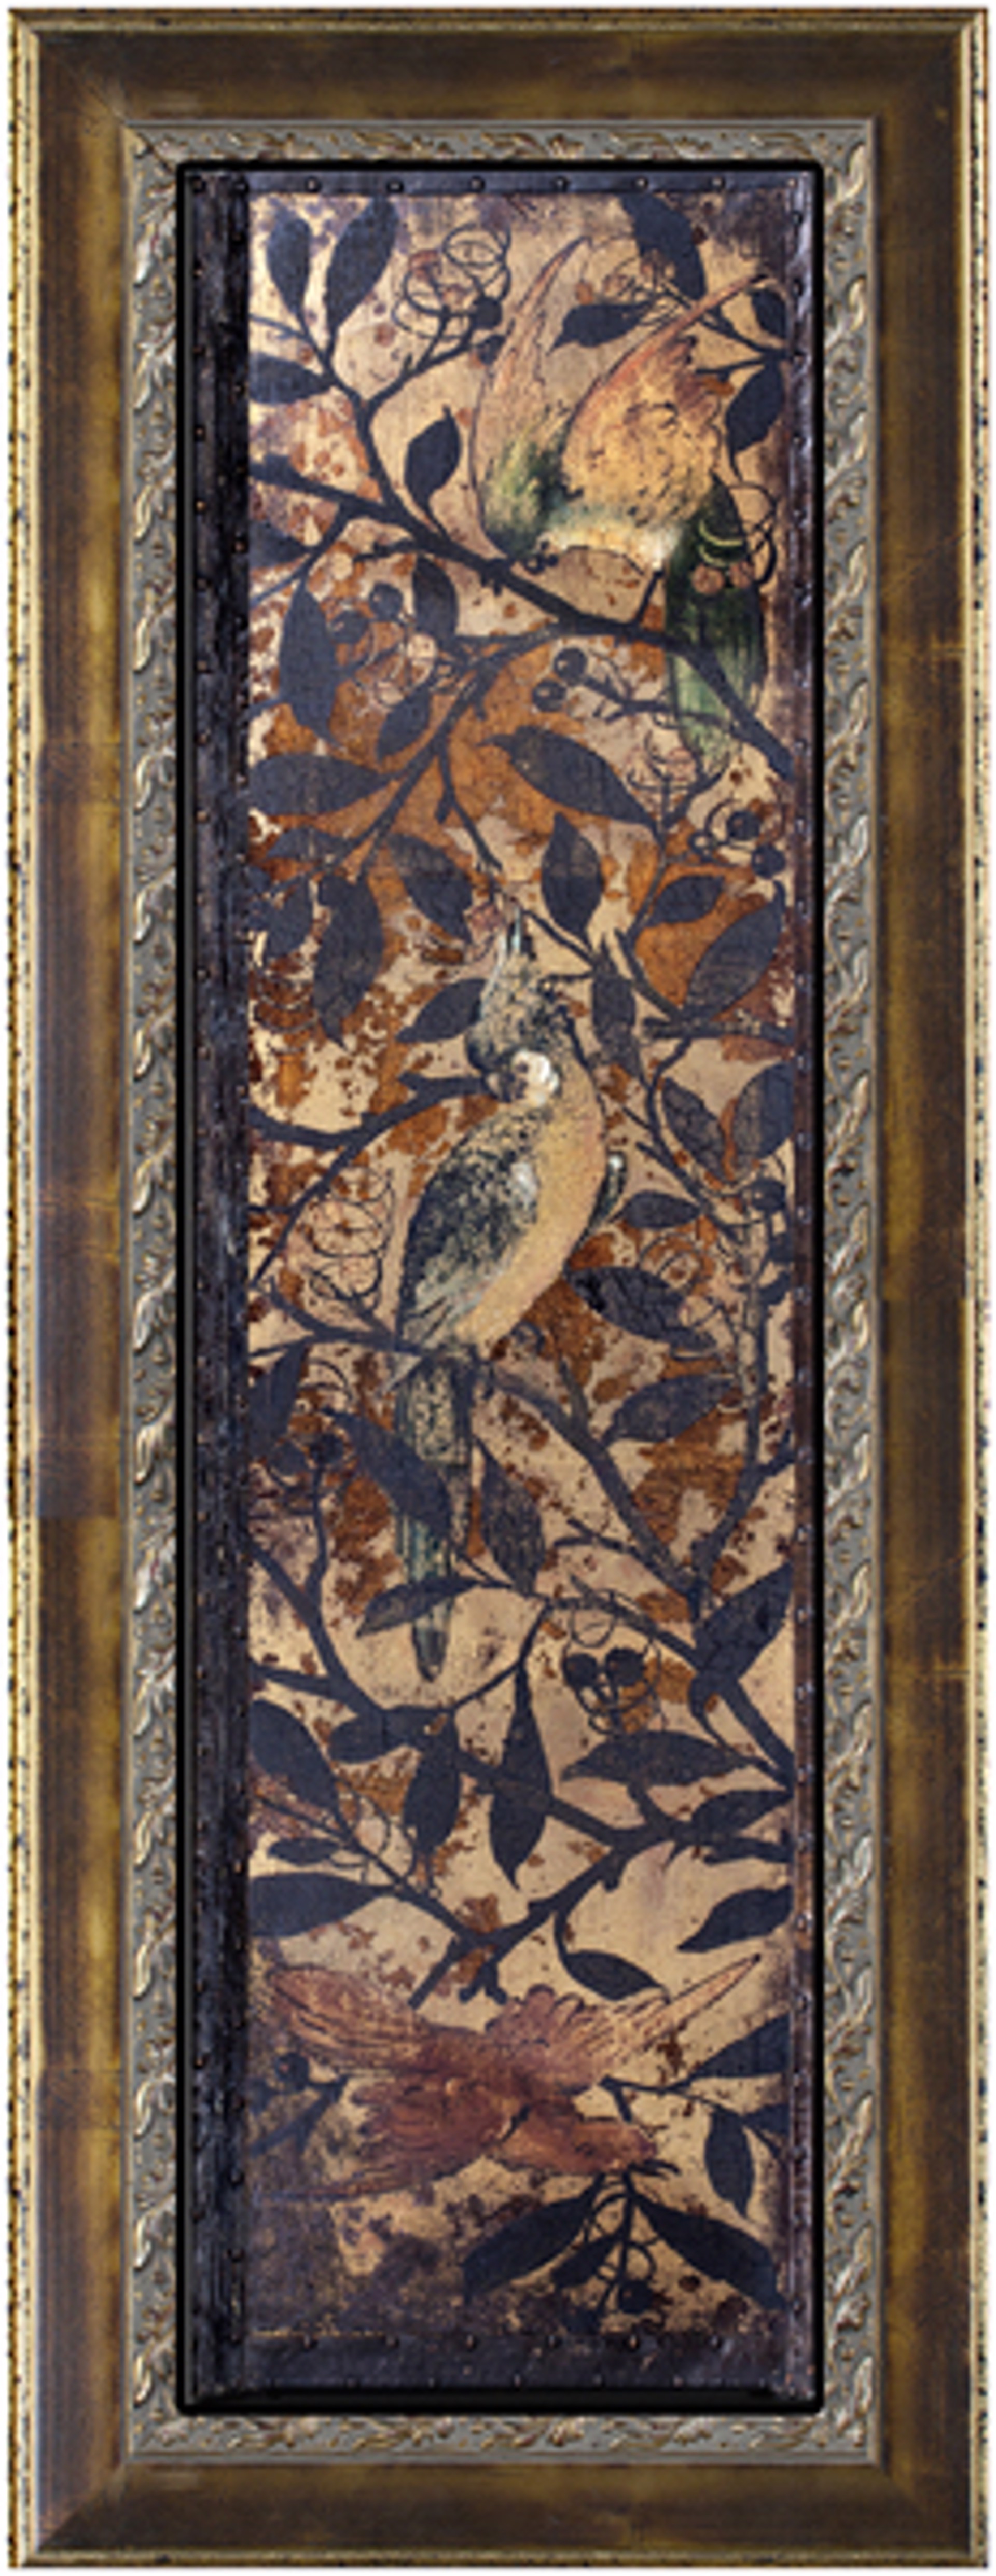 Tropical Birds in Trees Panel I by Chinese